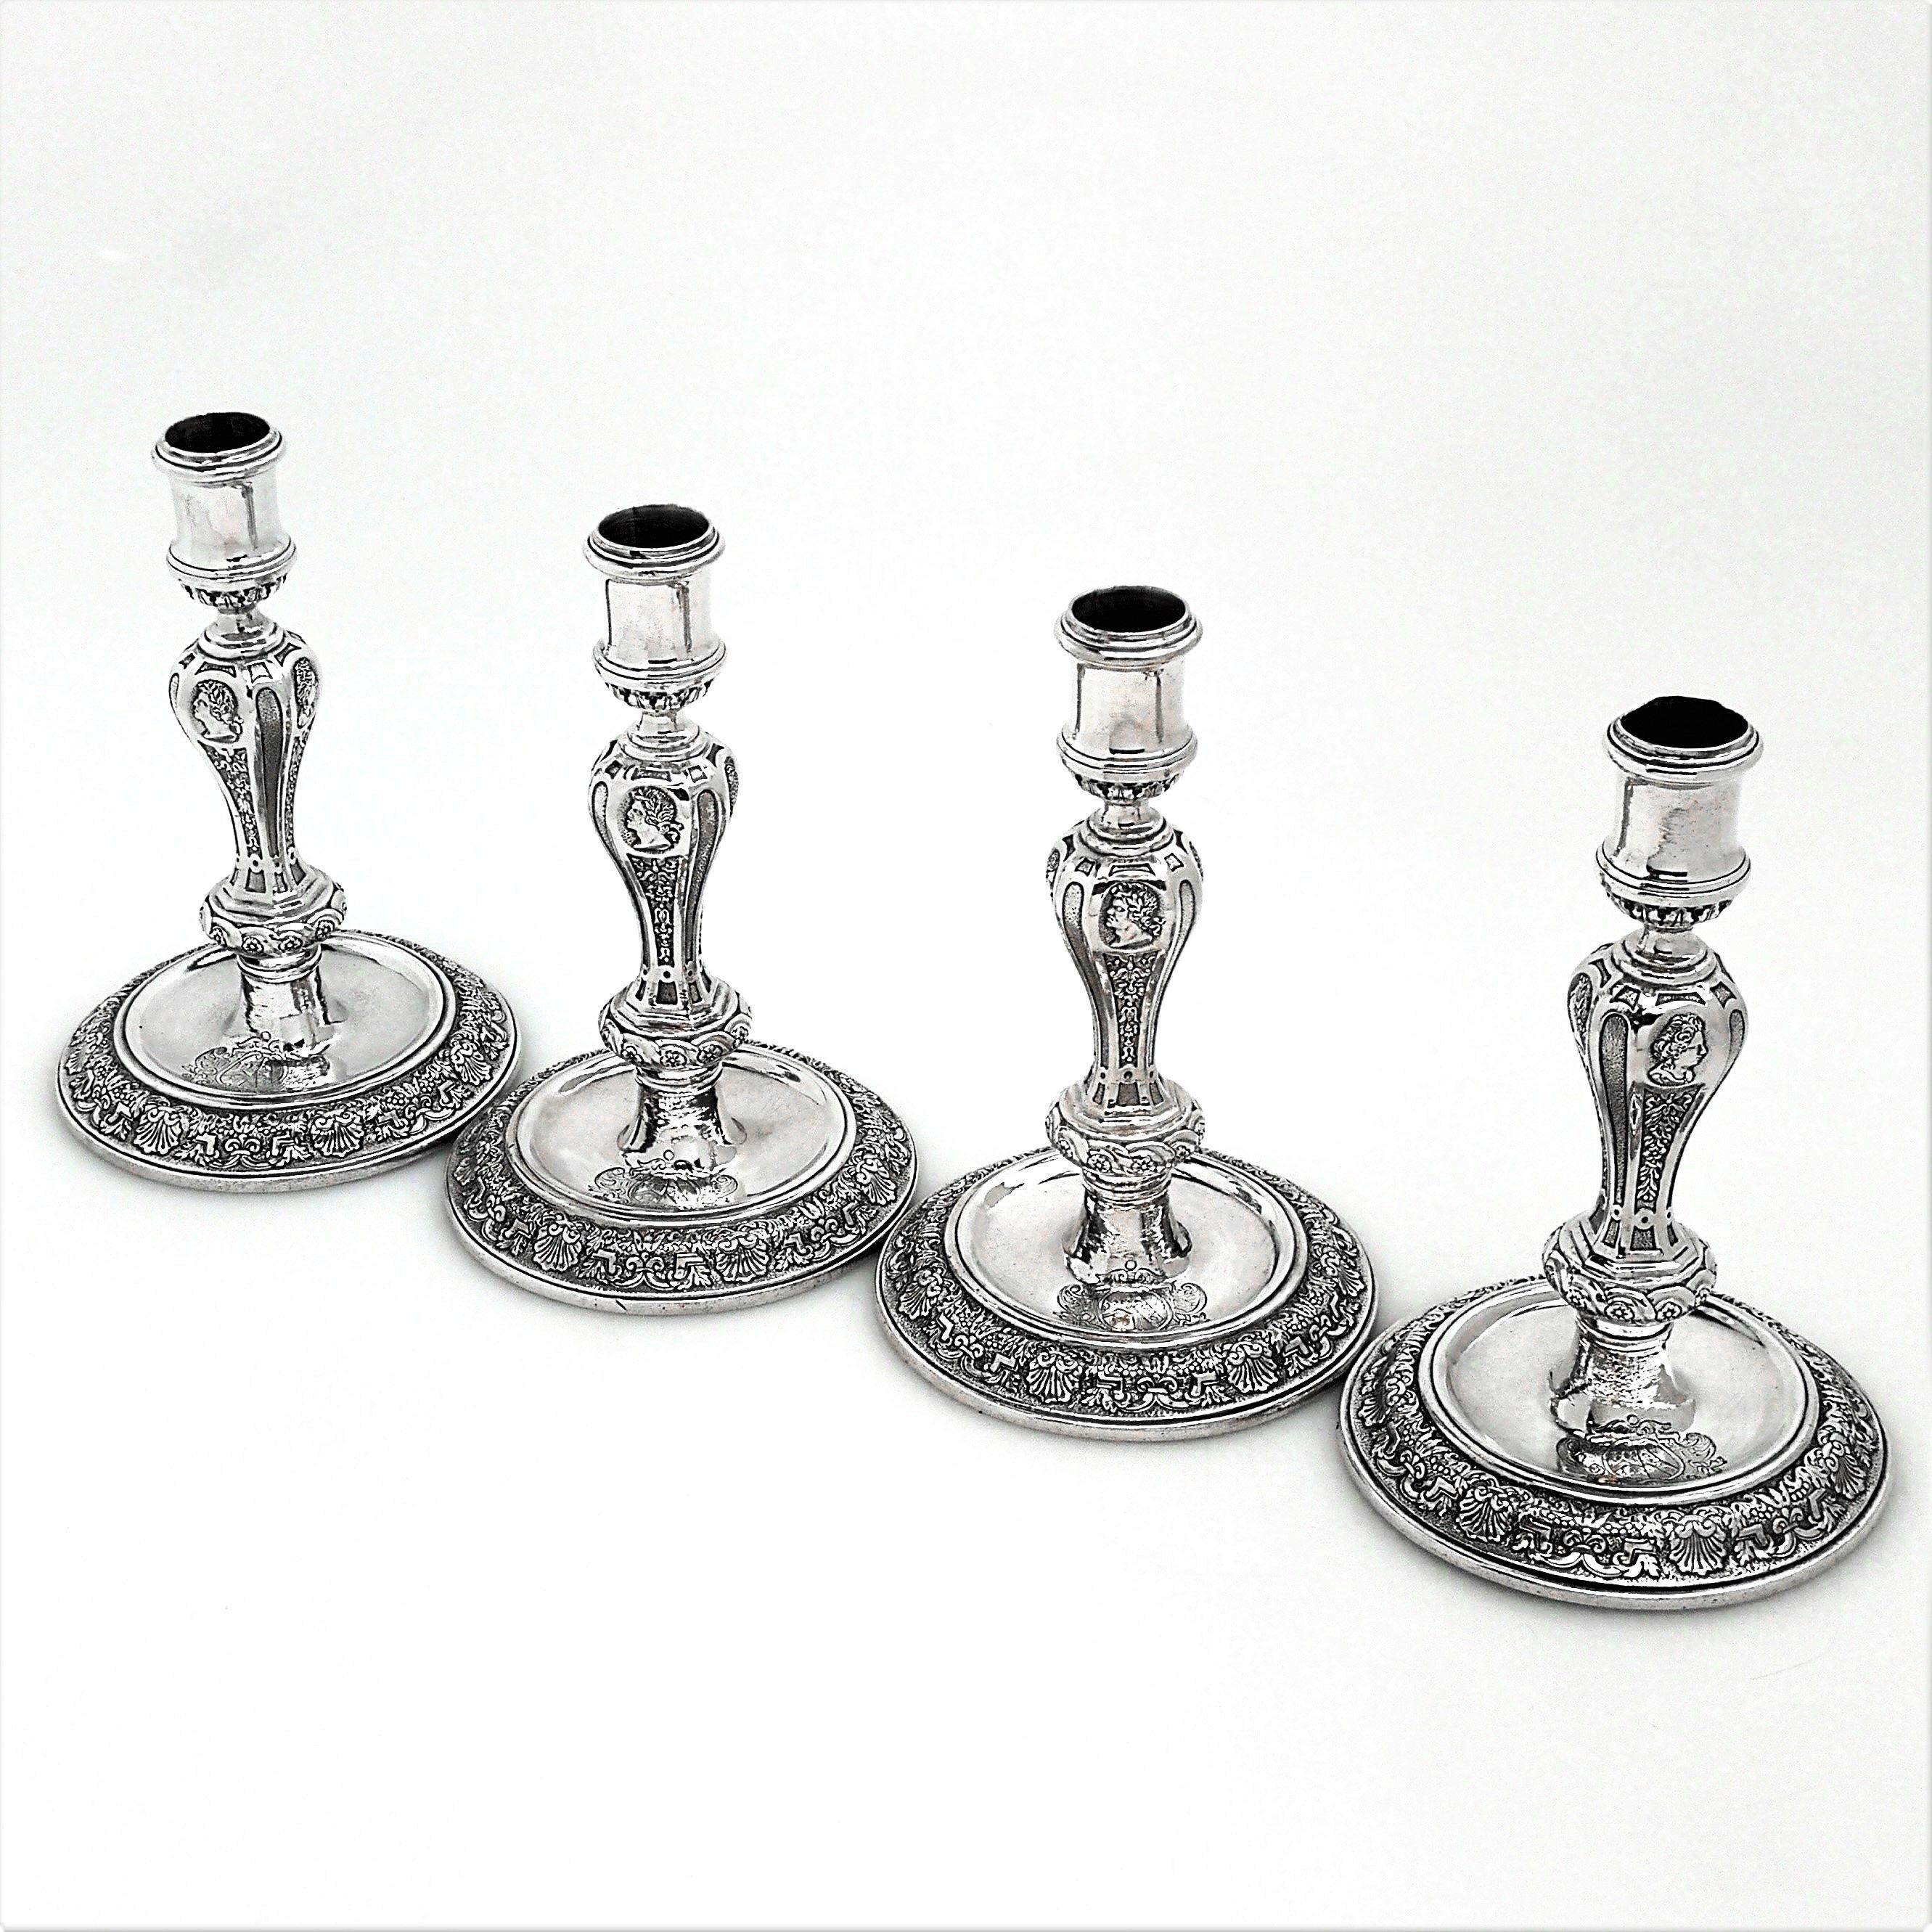 A magnificent set of four George I Sterling Silver Candlesticks. These Candlesticks feature round bases with a shell and foliage border surrounding sunken wells. The Candlesticks have shaped octagonal columns with portraits on the shoulders. The